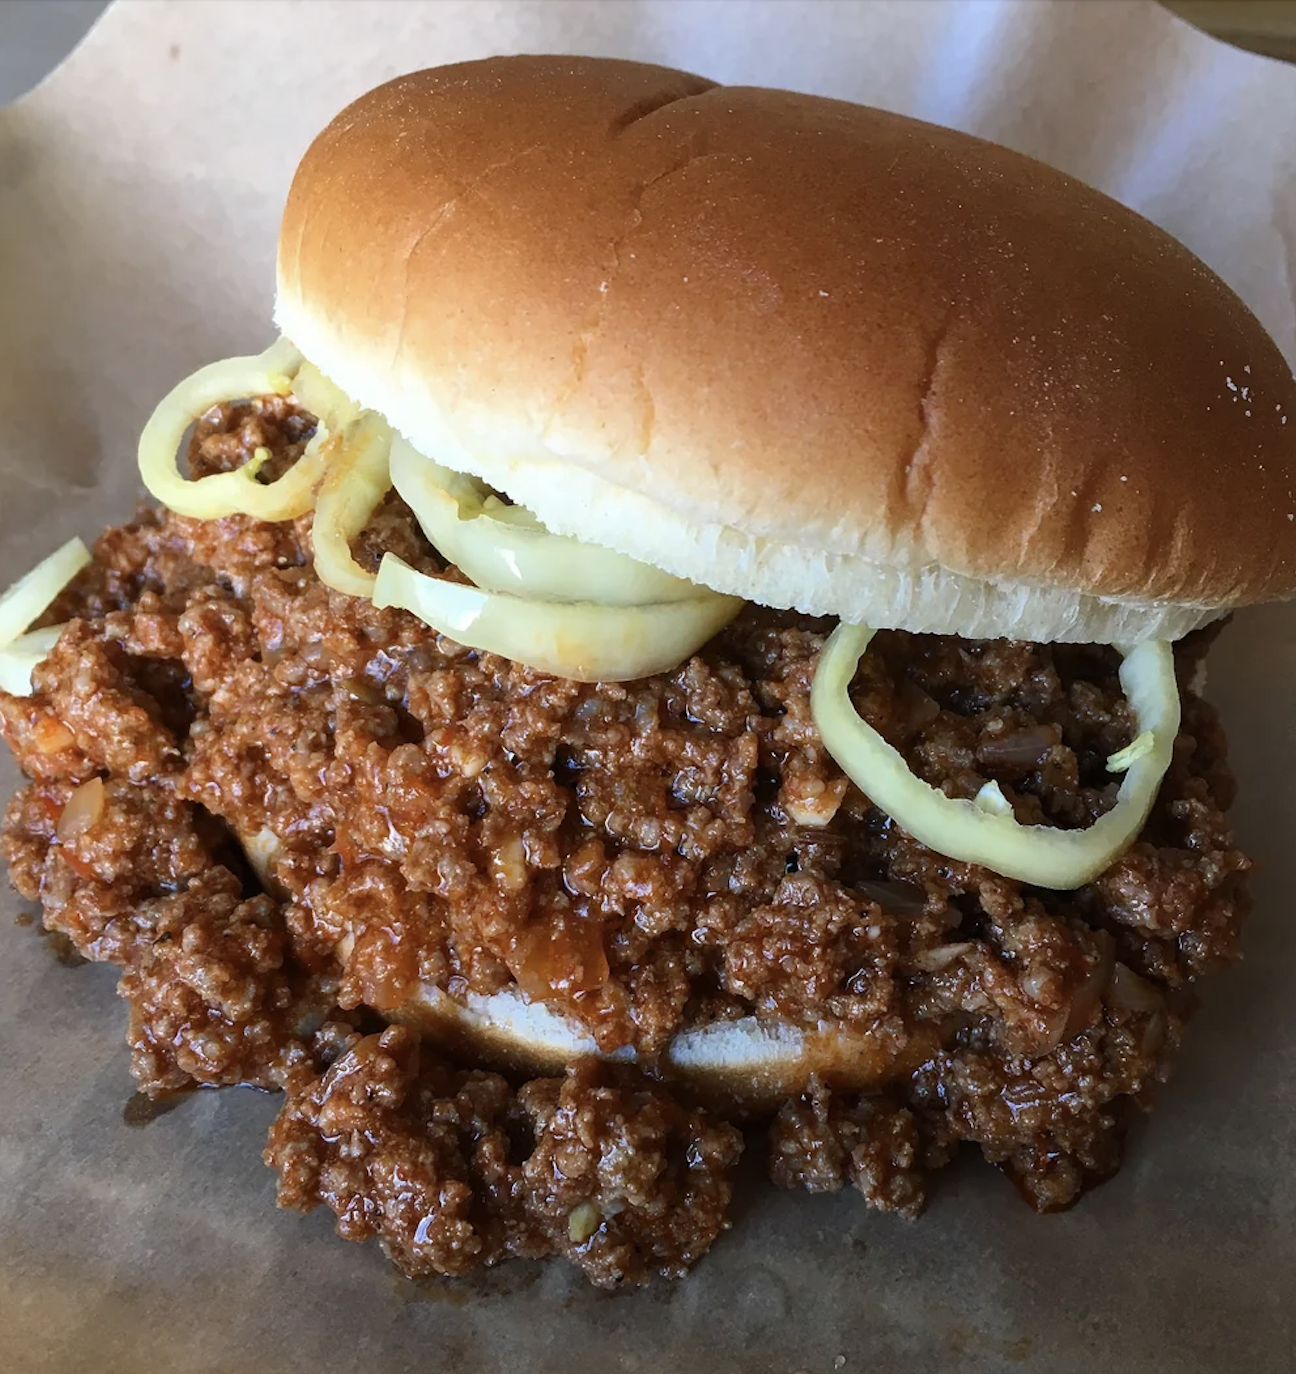 A sloppy joe sandwich with ground beef and onions on a bun